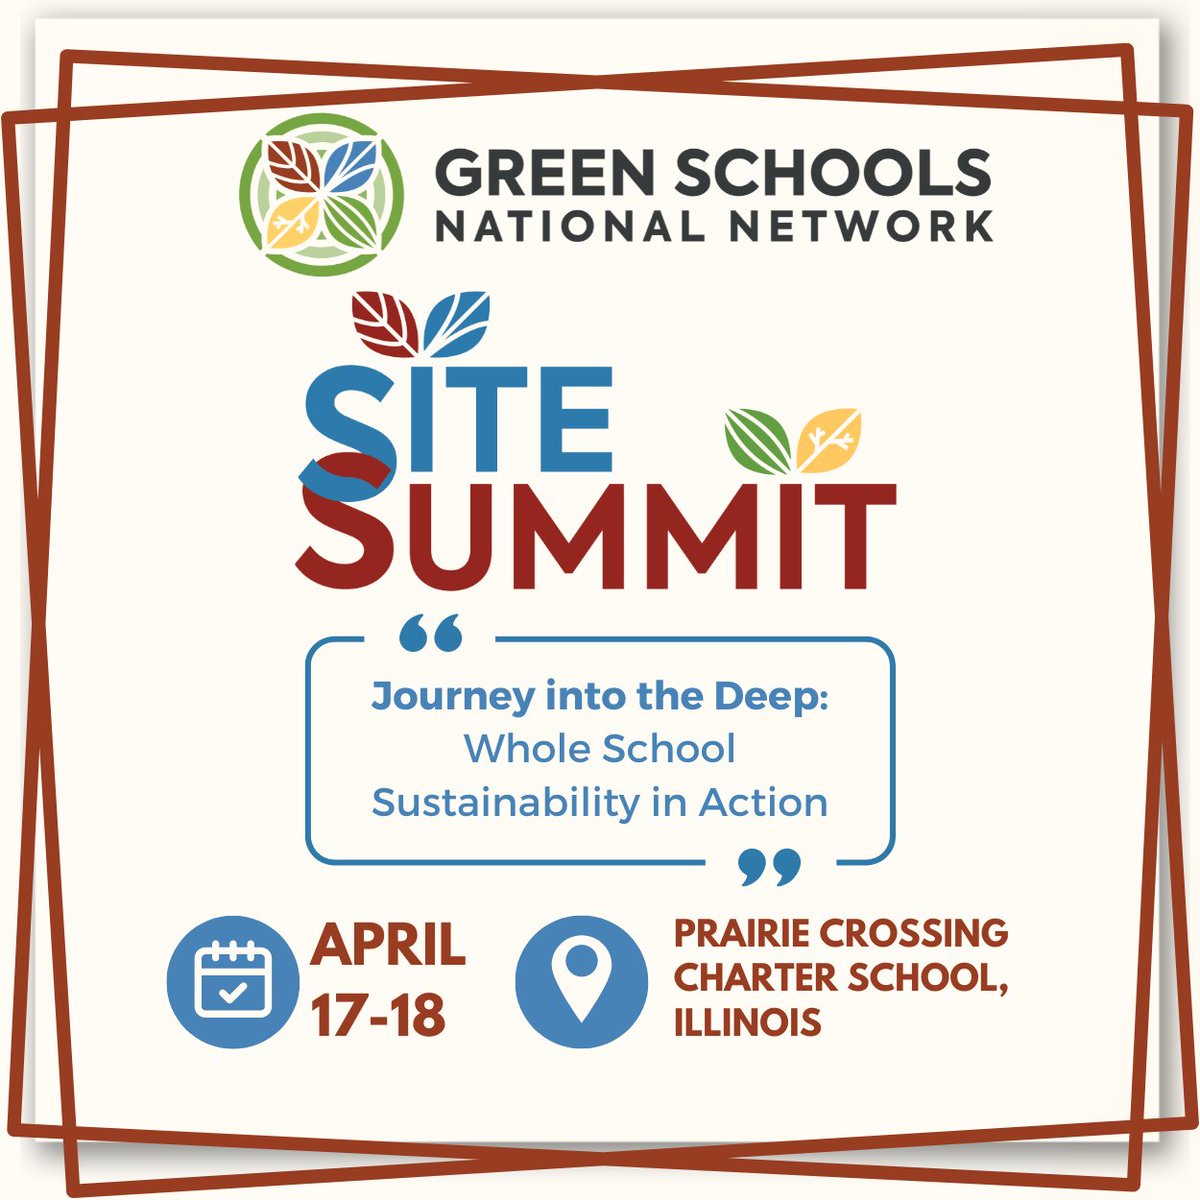 #PartnerNews Join @GreenSchoolsNN, Explore Prairie Crossing Charter School's innovative practices in Grayslake, Illinois, winner of the Best of Green Schools award. Learn how they're making a difference for students and the planet. Don't miss this 1.5-dayseminar!